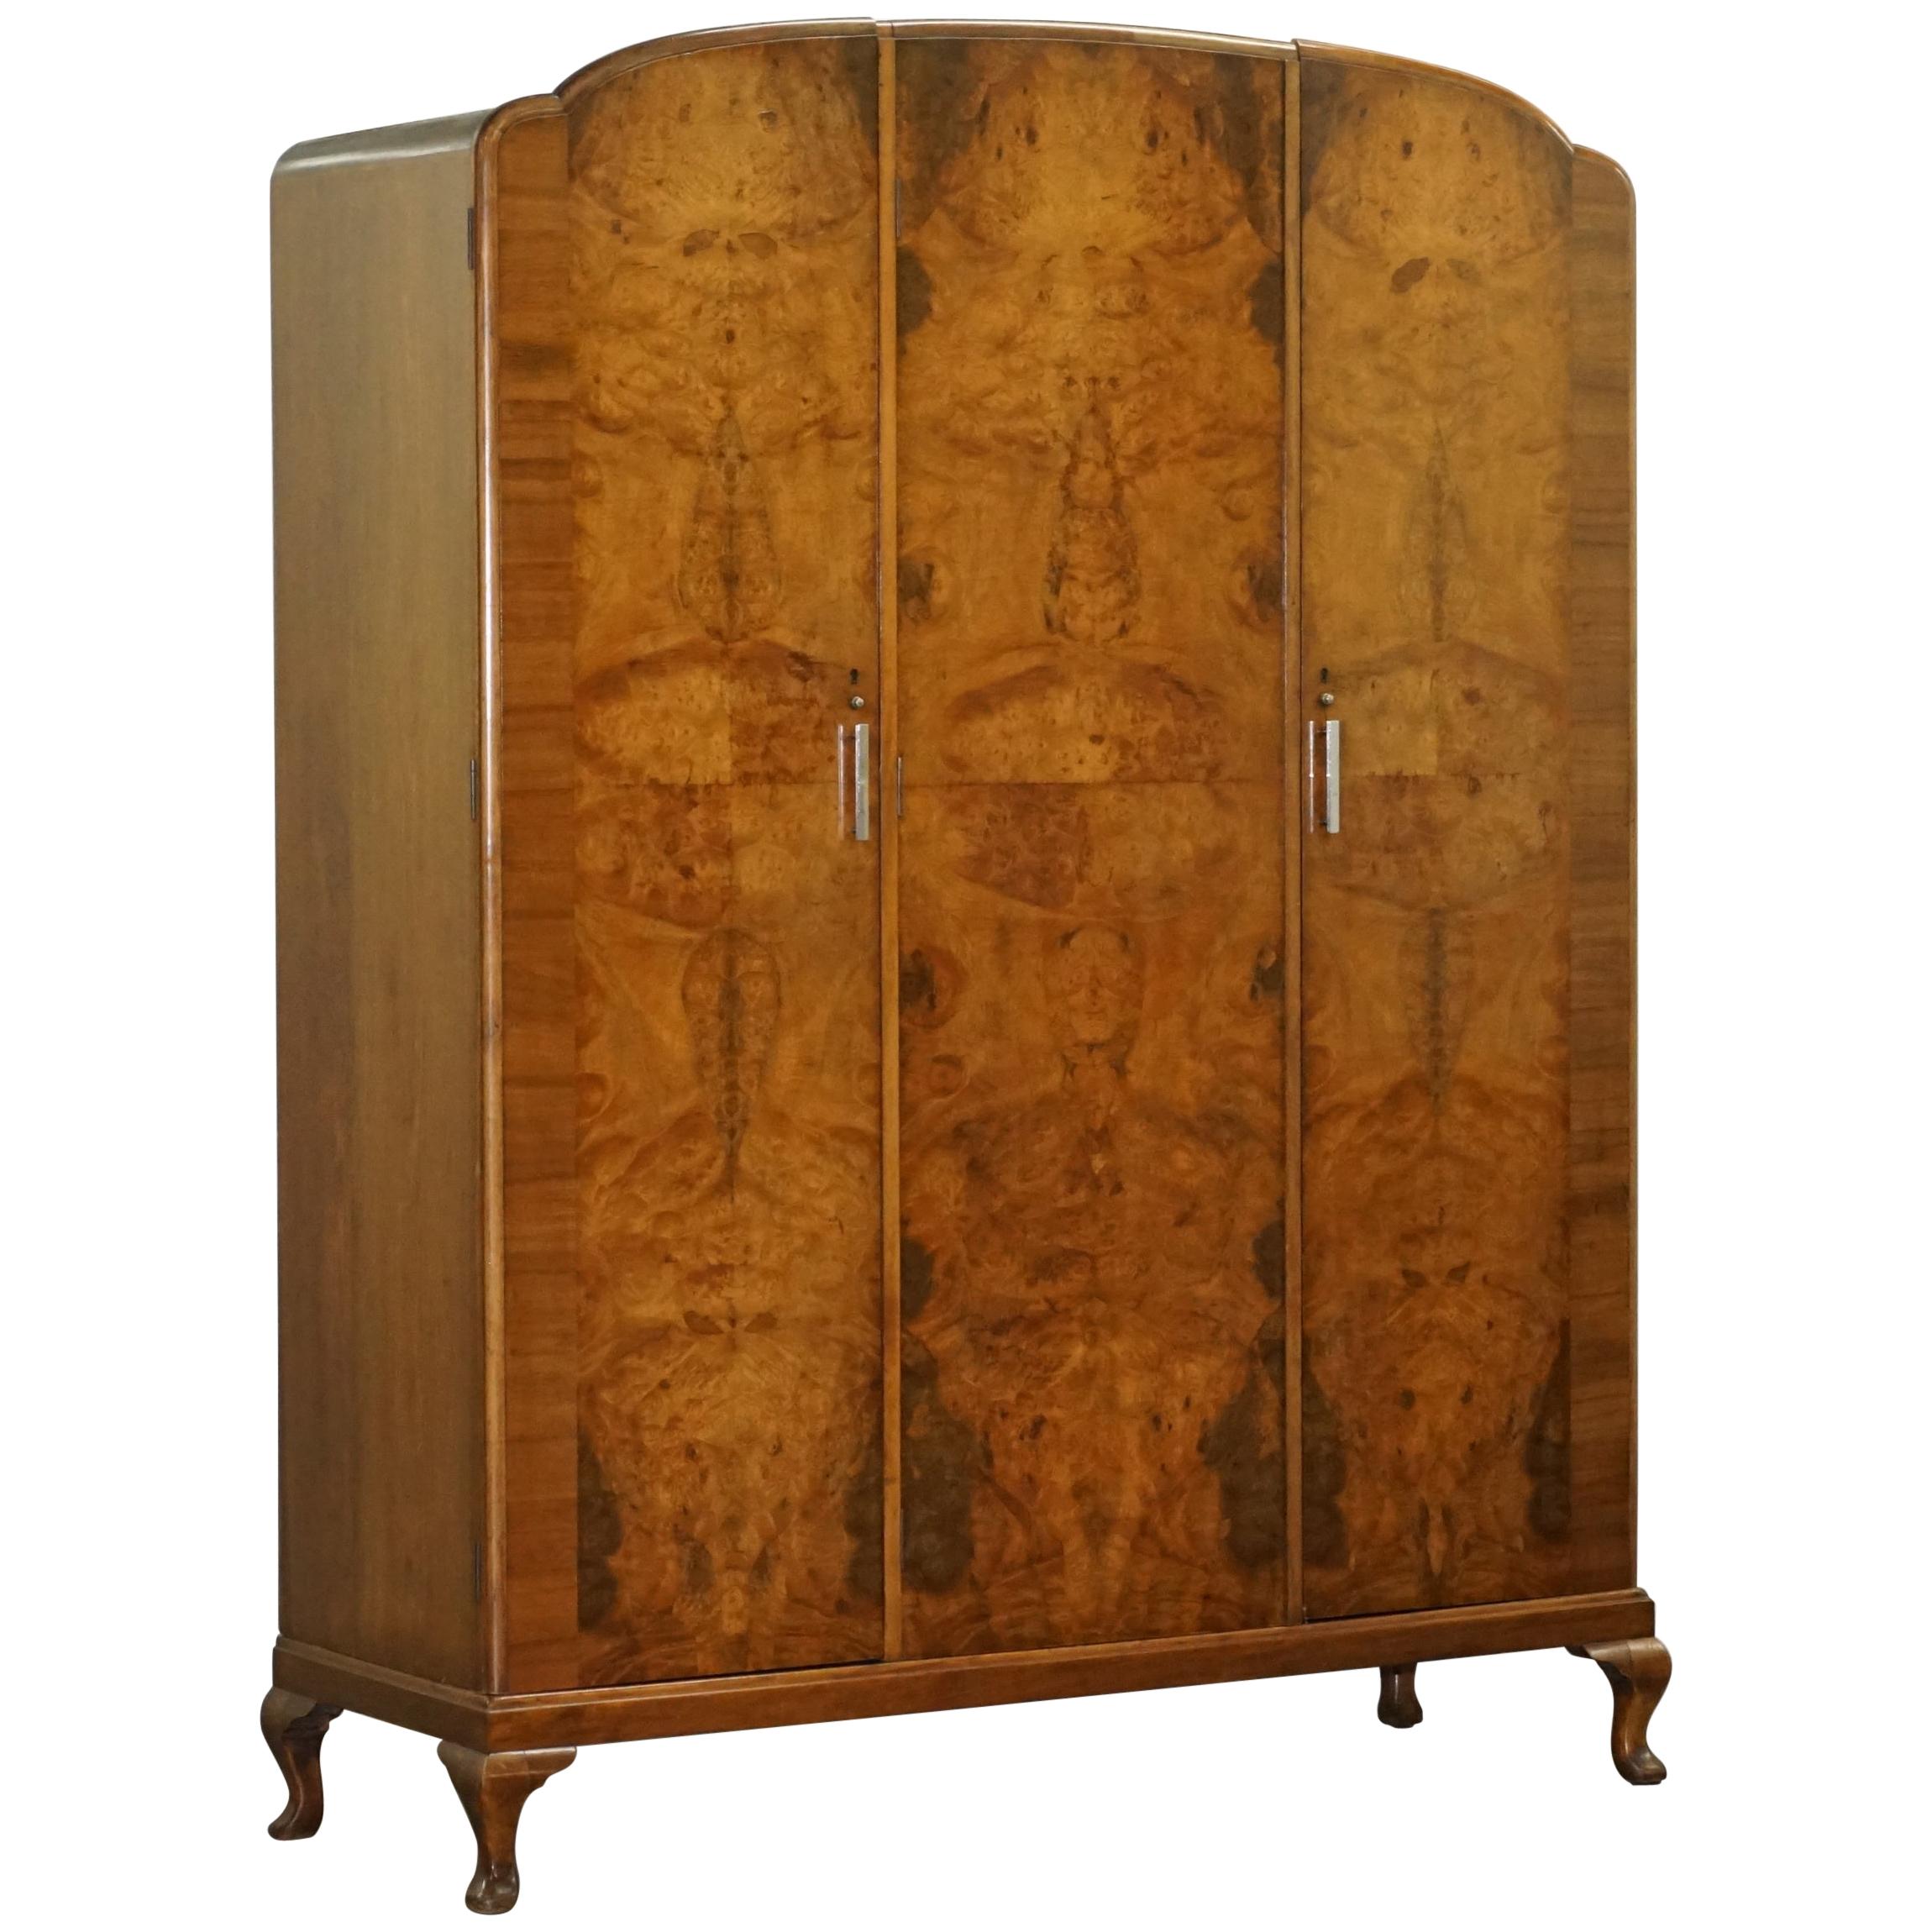 We are delighted to offer for sale this stunning burr walnut Waring & Gillow 1932 triple bank wardrobe with built in mirror

This is a very good looking well made and decorative piece, the door panels have rich warm burr walnut which glows in the